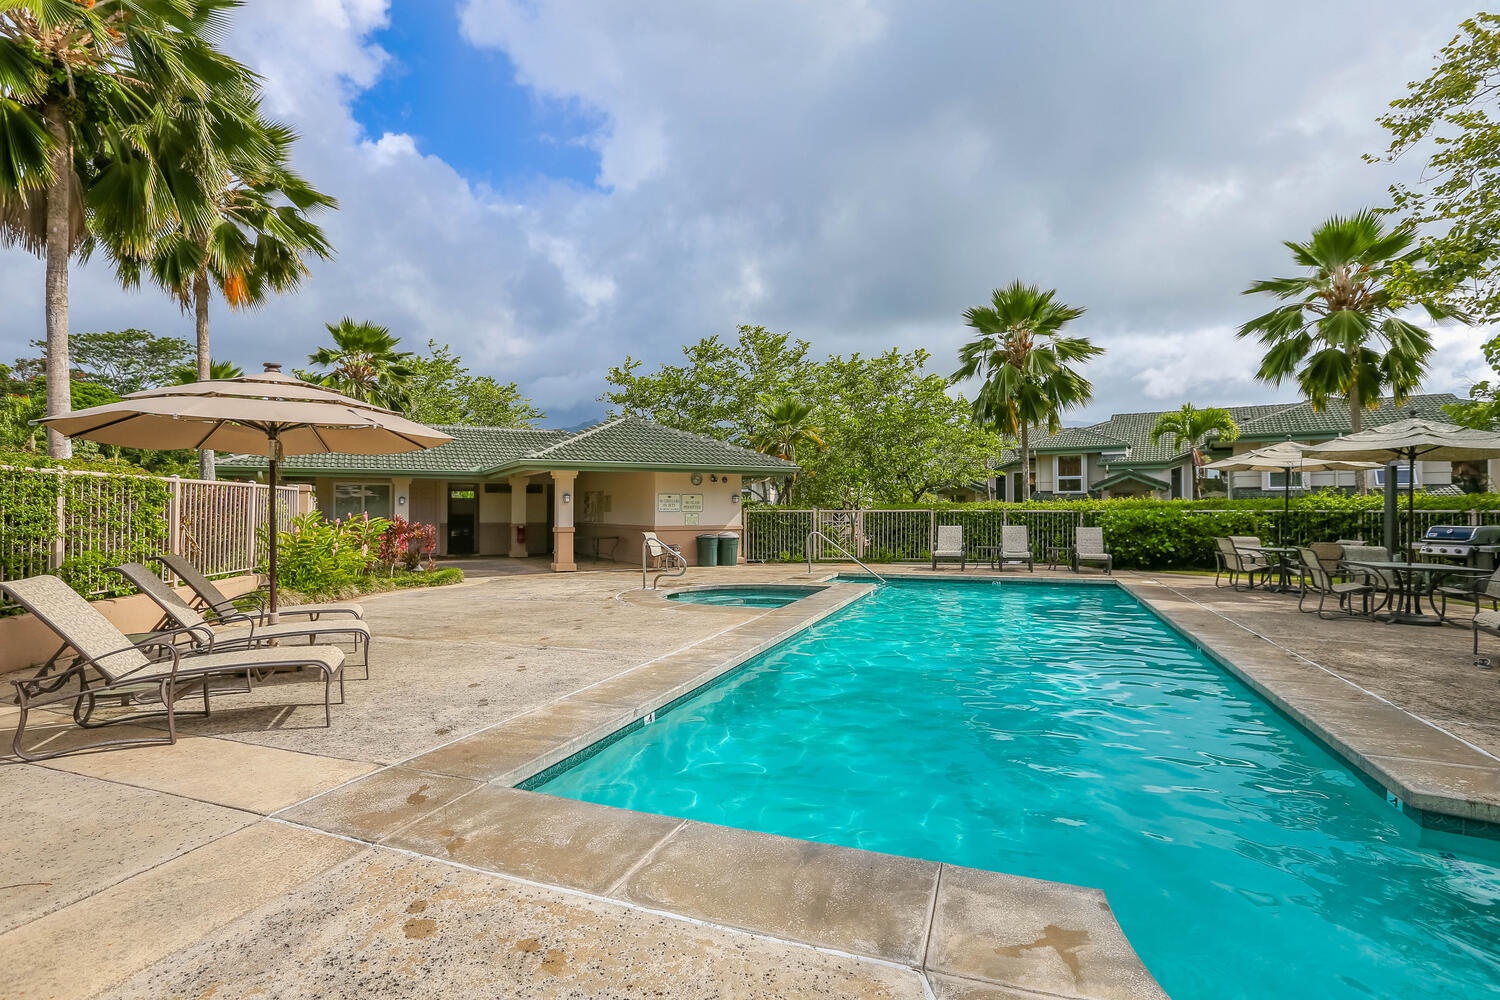 Princeville Vacation Rentals, Sea Glass - Beat the island heat at the community pool.